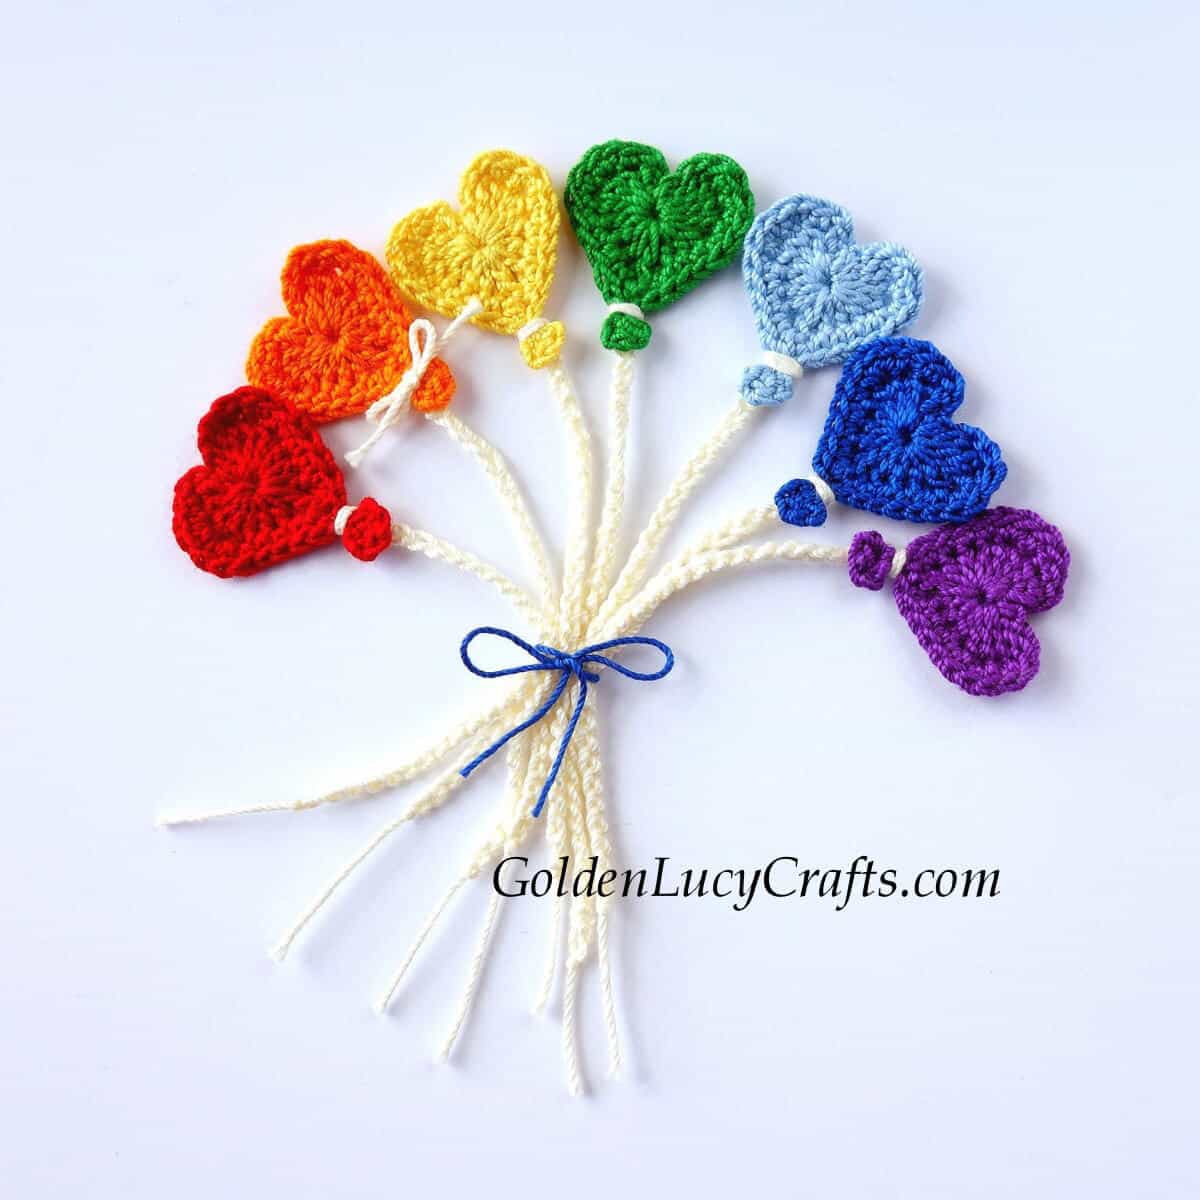 Bunch of crocheted heart-shaped balloons in colors of rainbow.